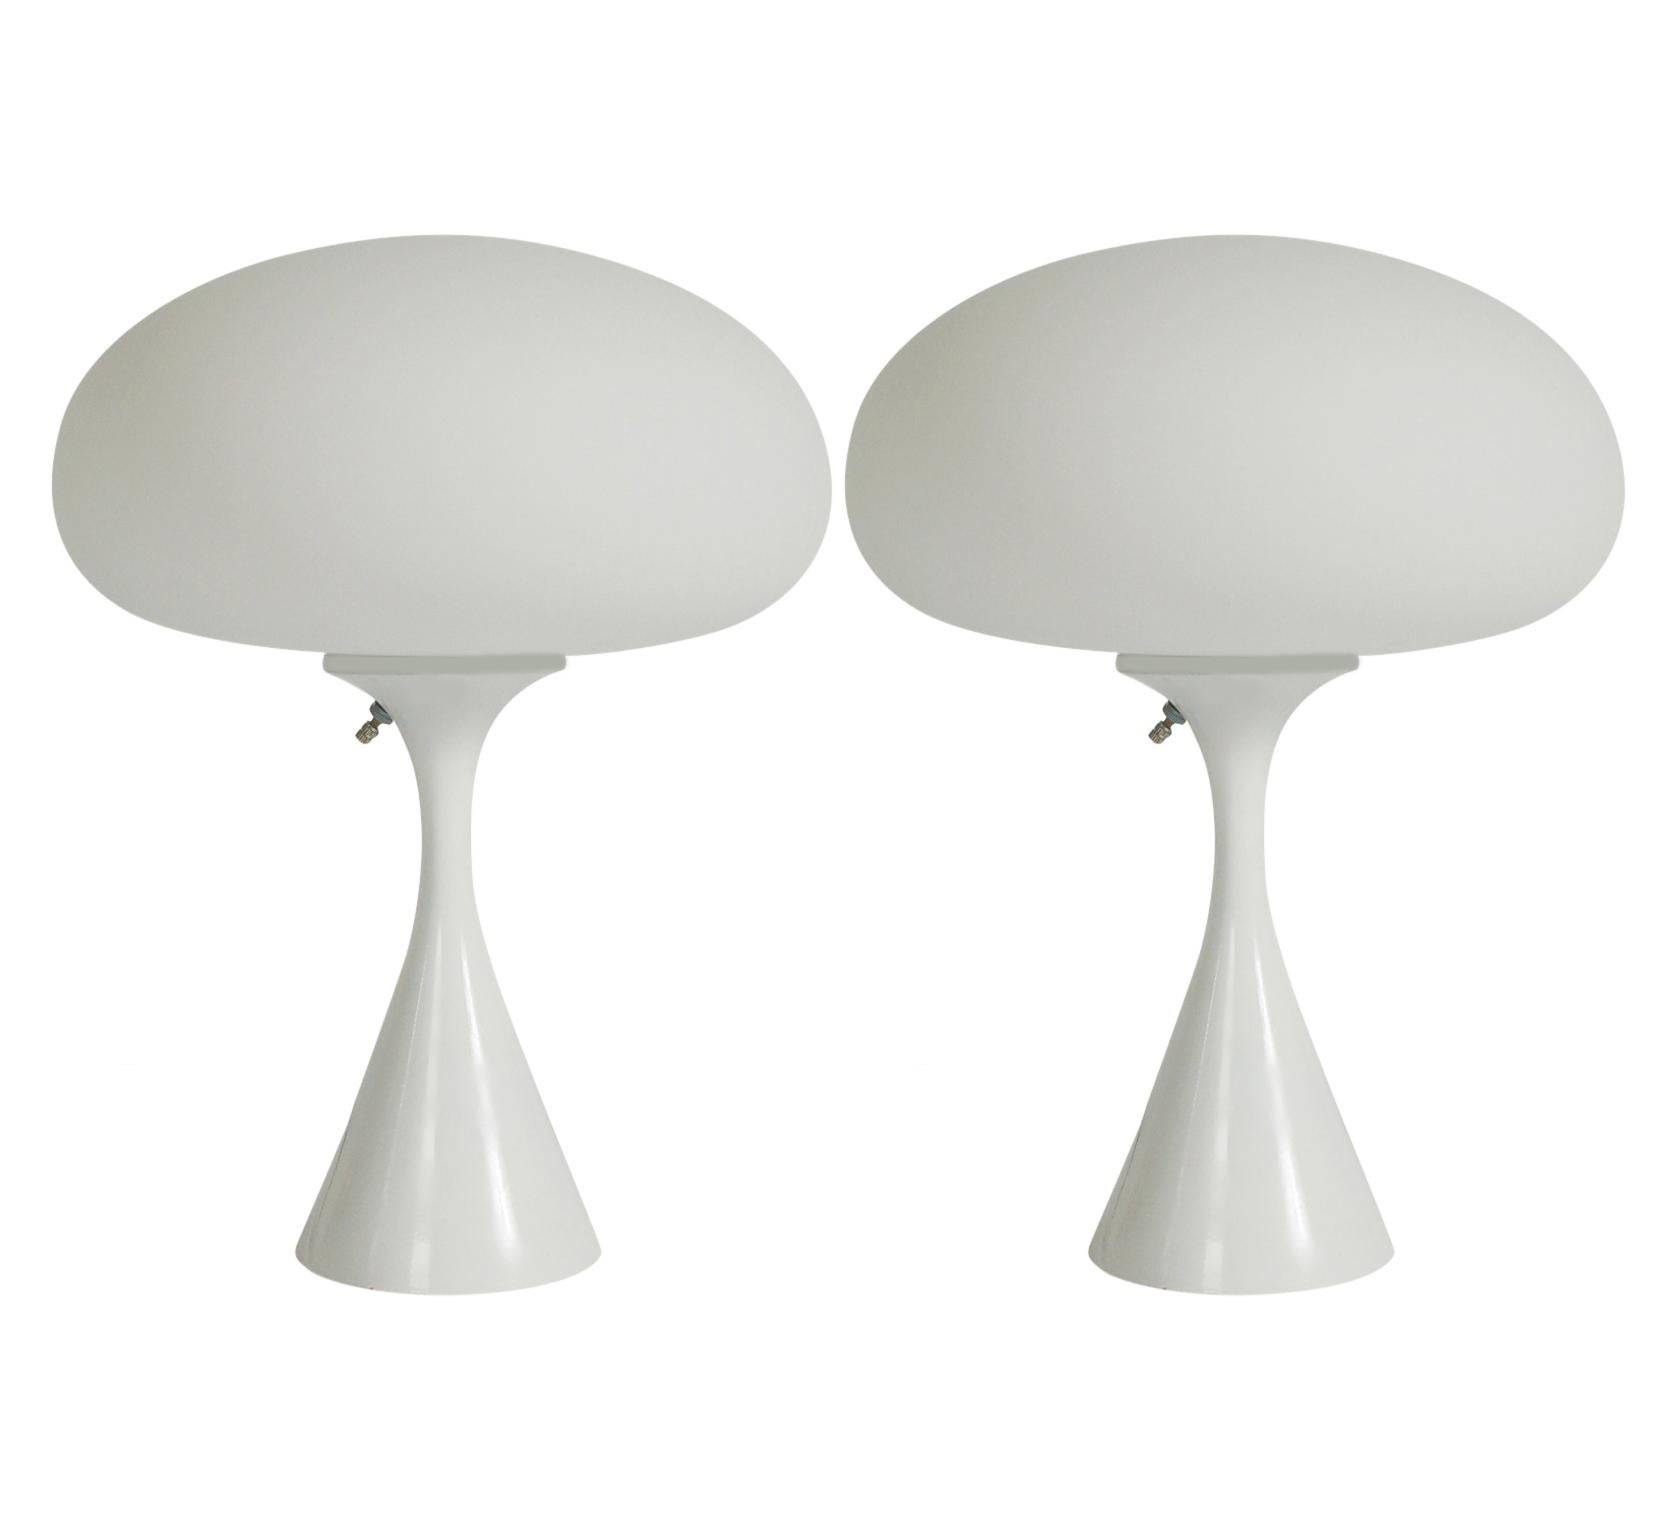 Contemporary Pair of Mid-Century Modern Table Lamps by Designline in White on White Glass For Sale